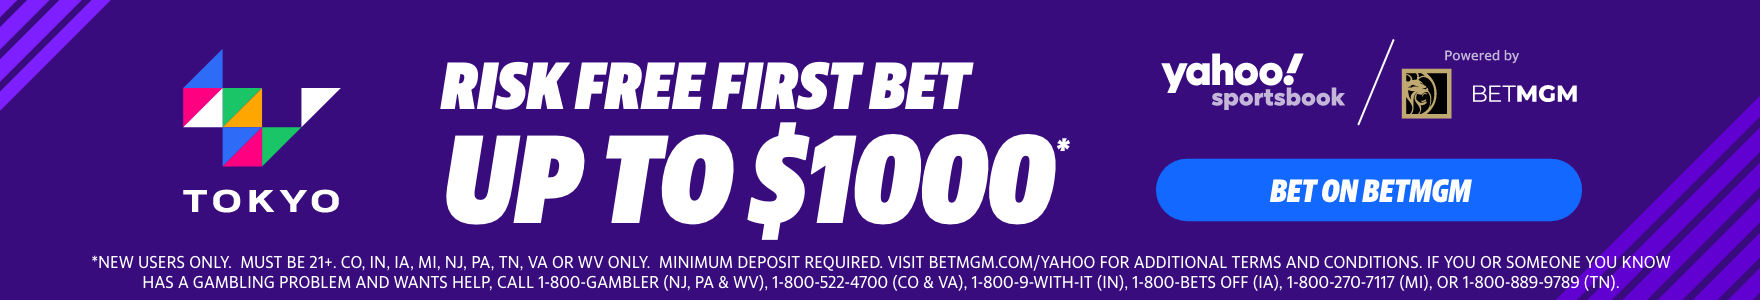 $1,000 Risk-Free first bet